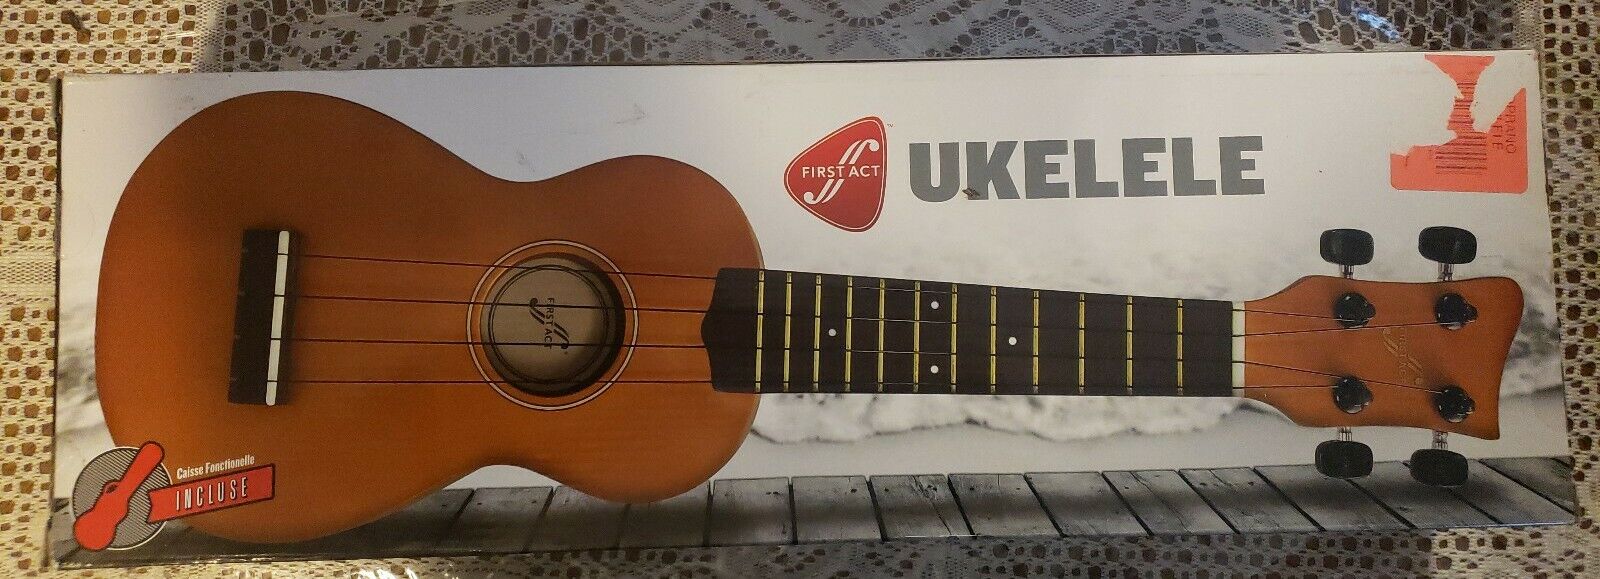 First Act Ukulele kid sized traditional Guitar – With Designer Carrying Case Nib 2